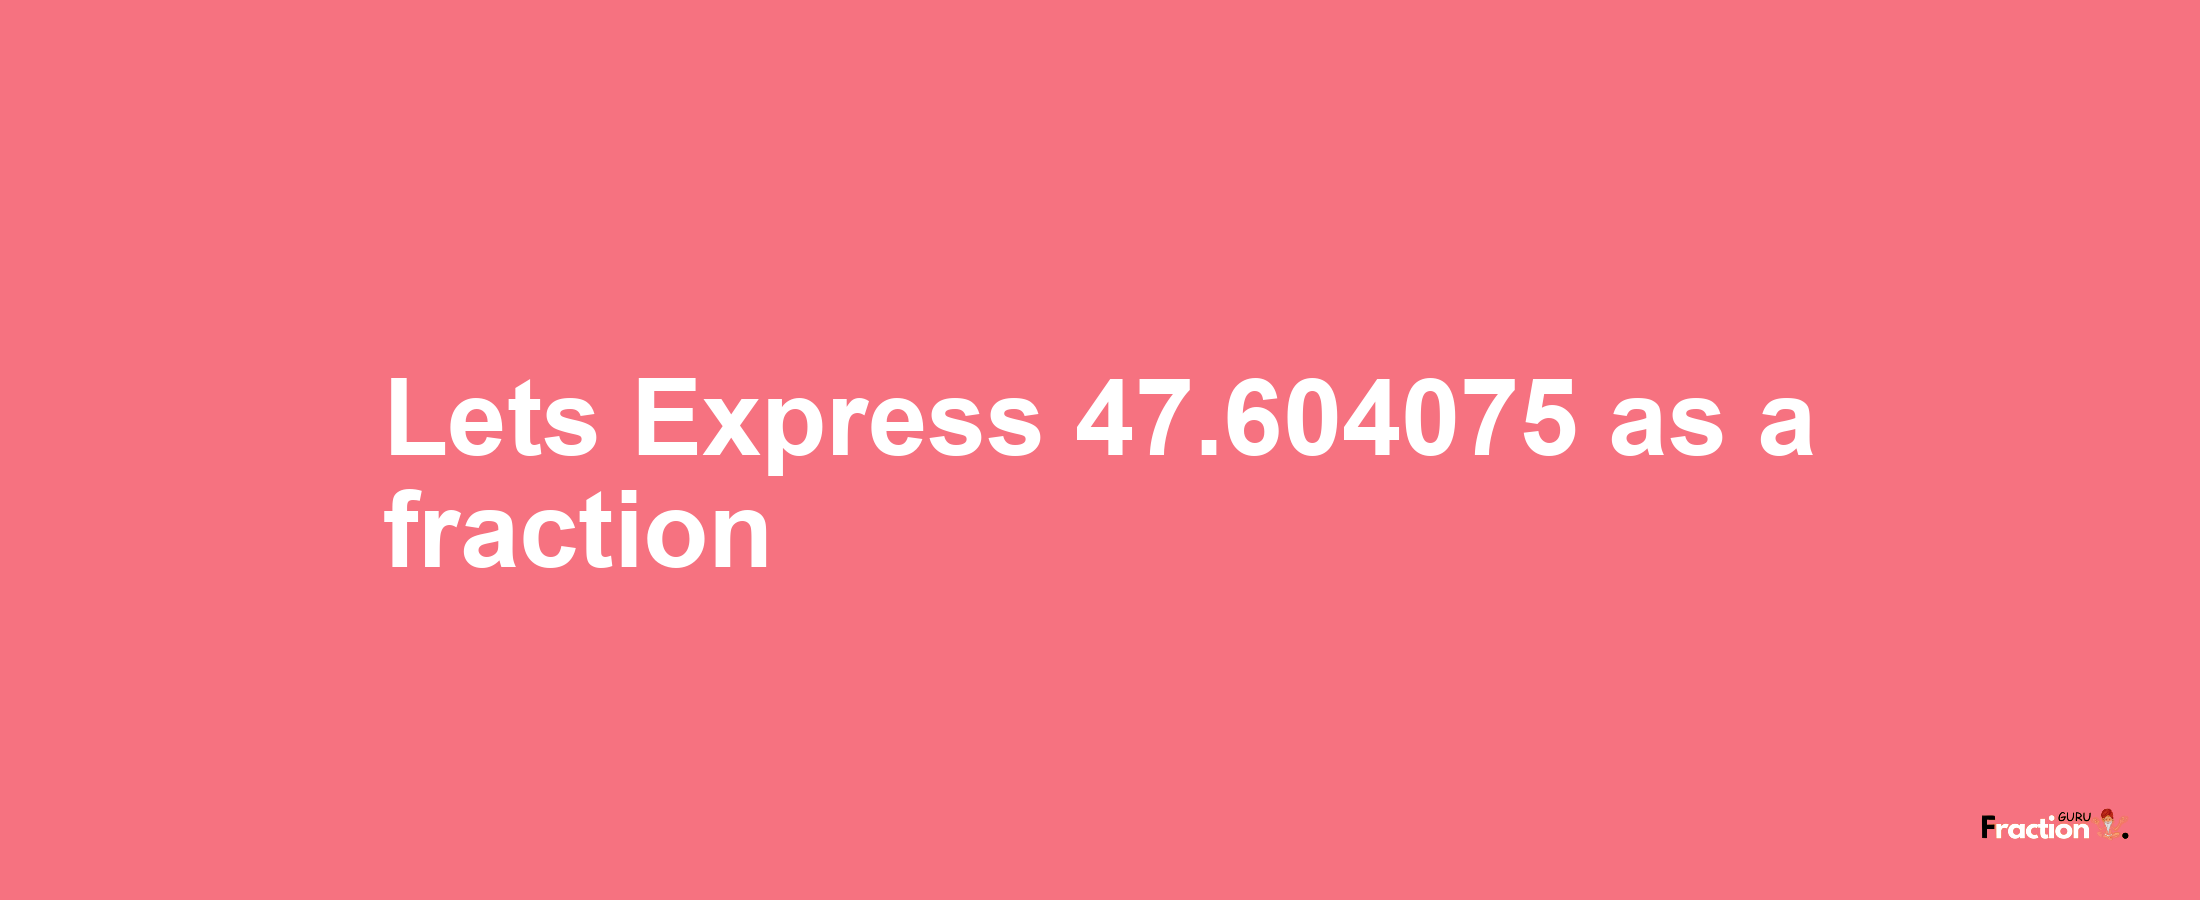 Lets Express 47.604075 as afraction